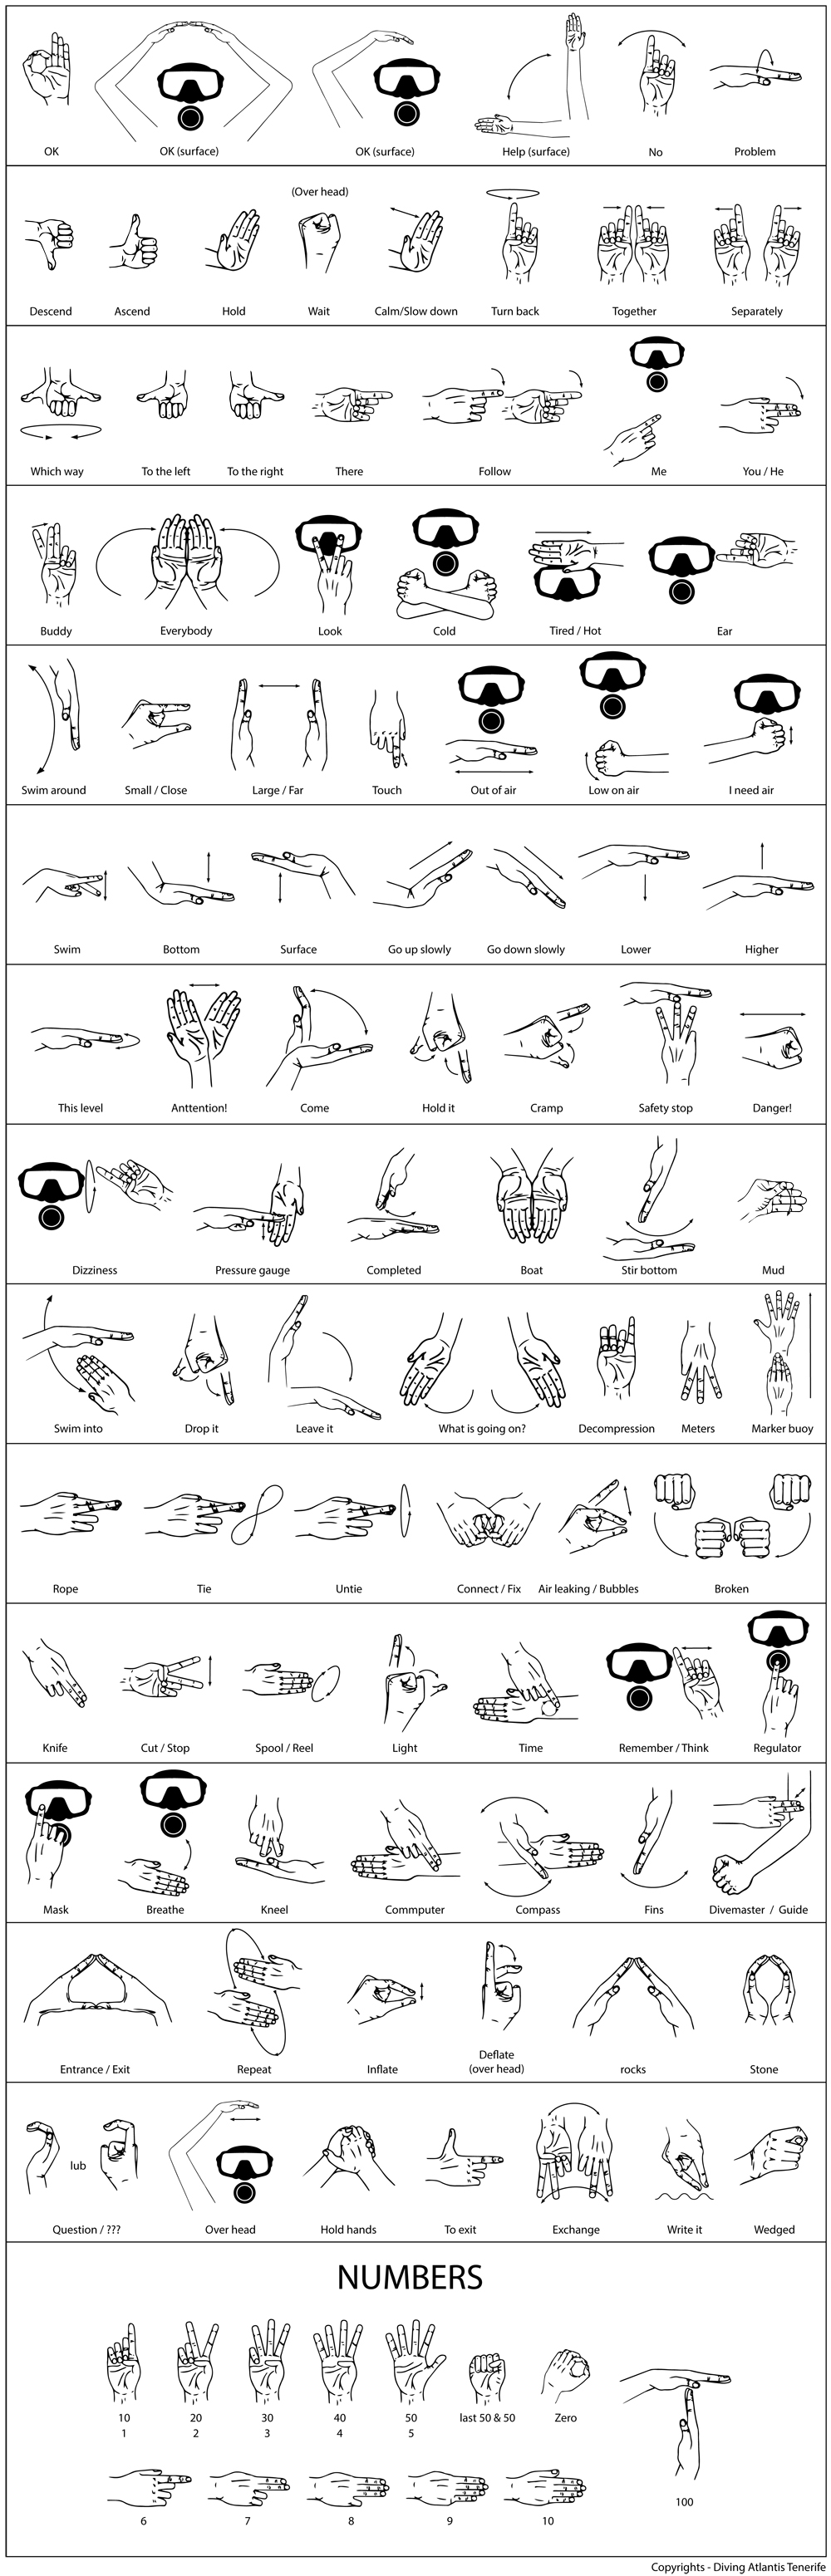 Diving signs